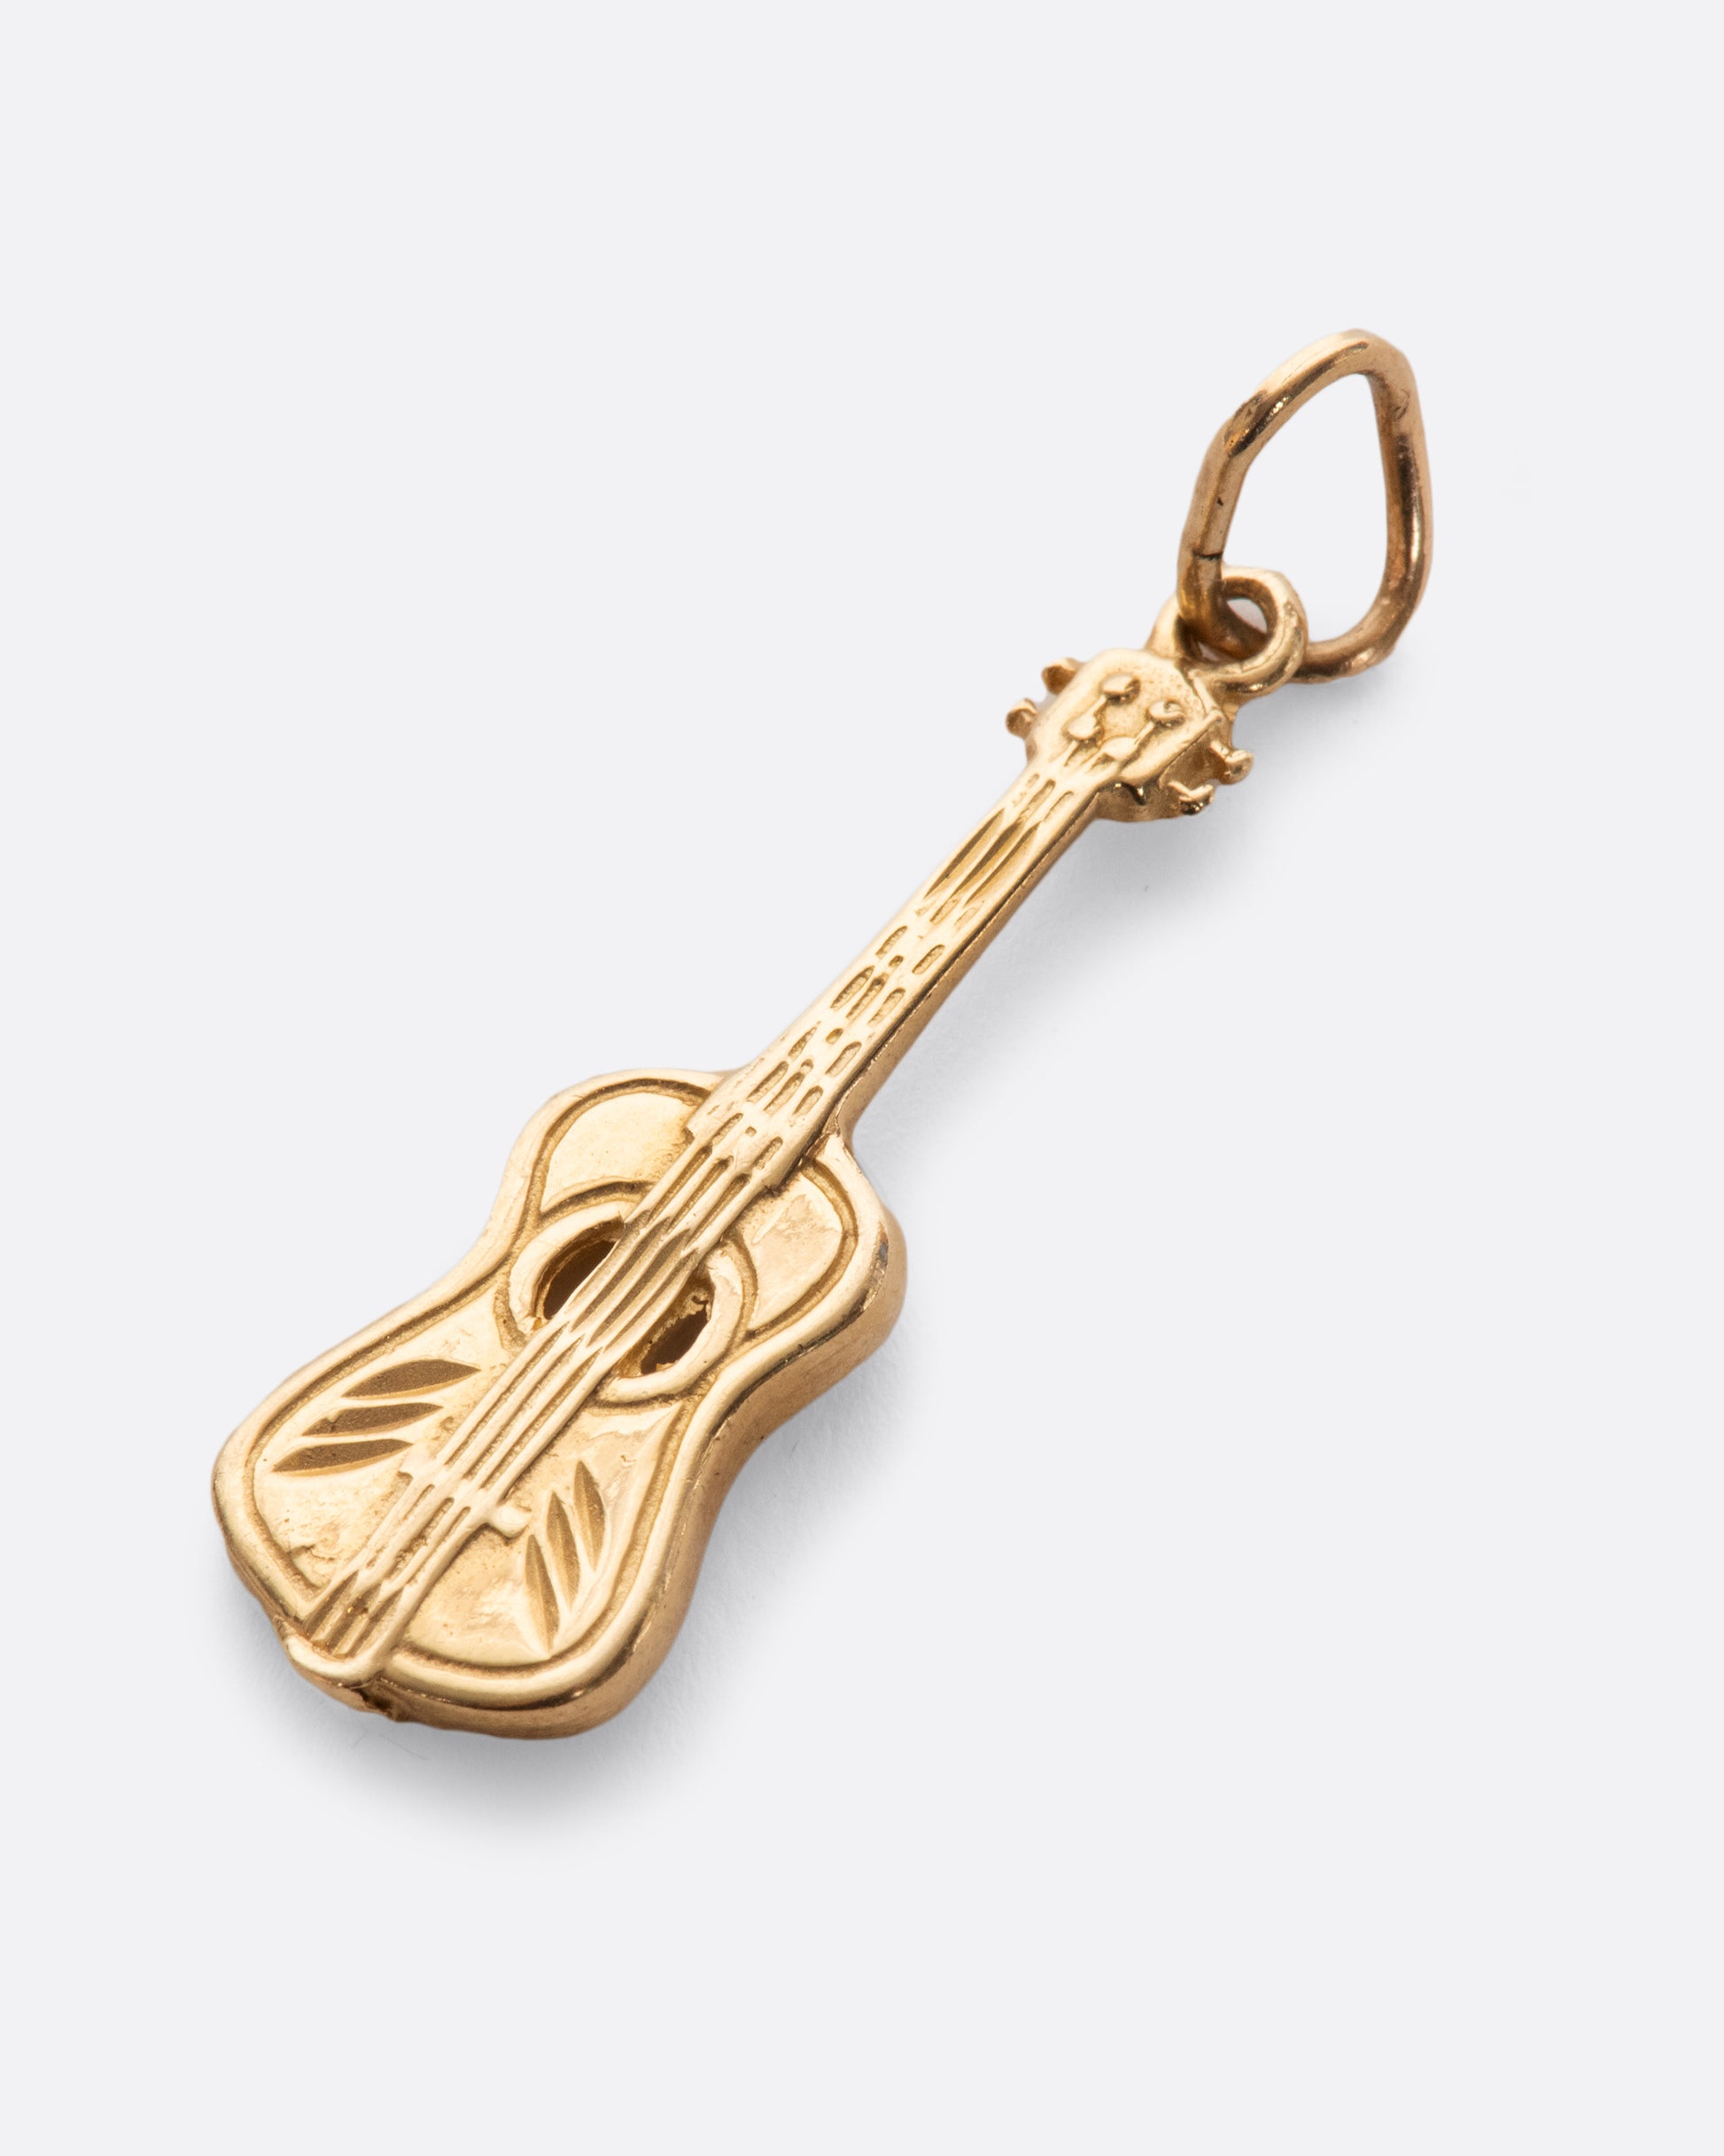 We love the incredible detail in this vintage yellow gold guitar charm, complete with a hollowed out sound hole